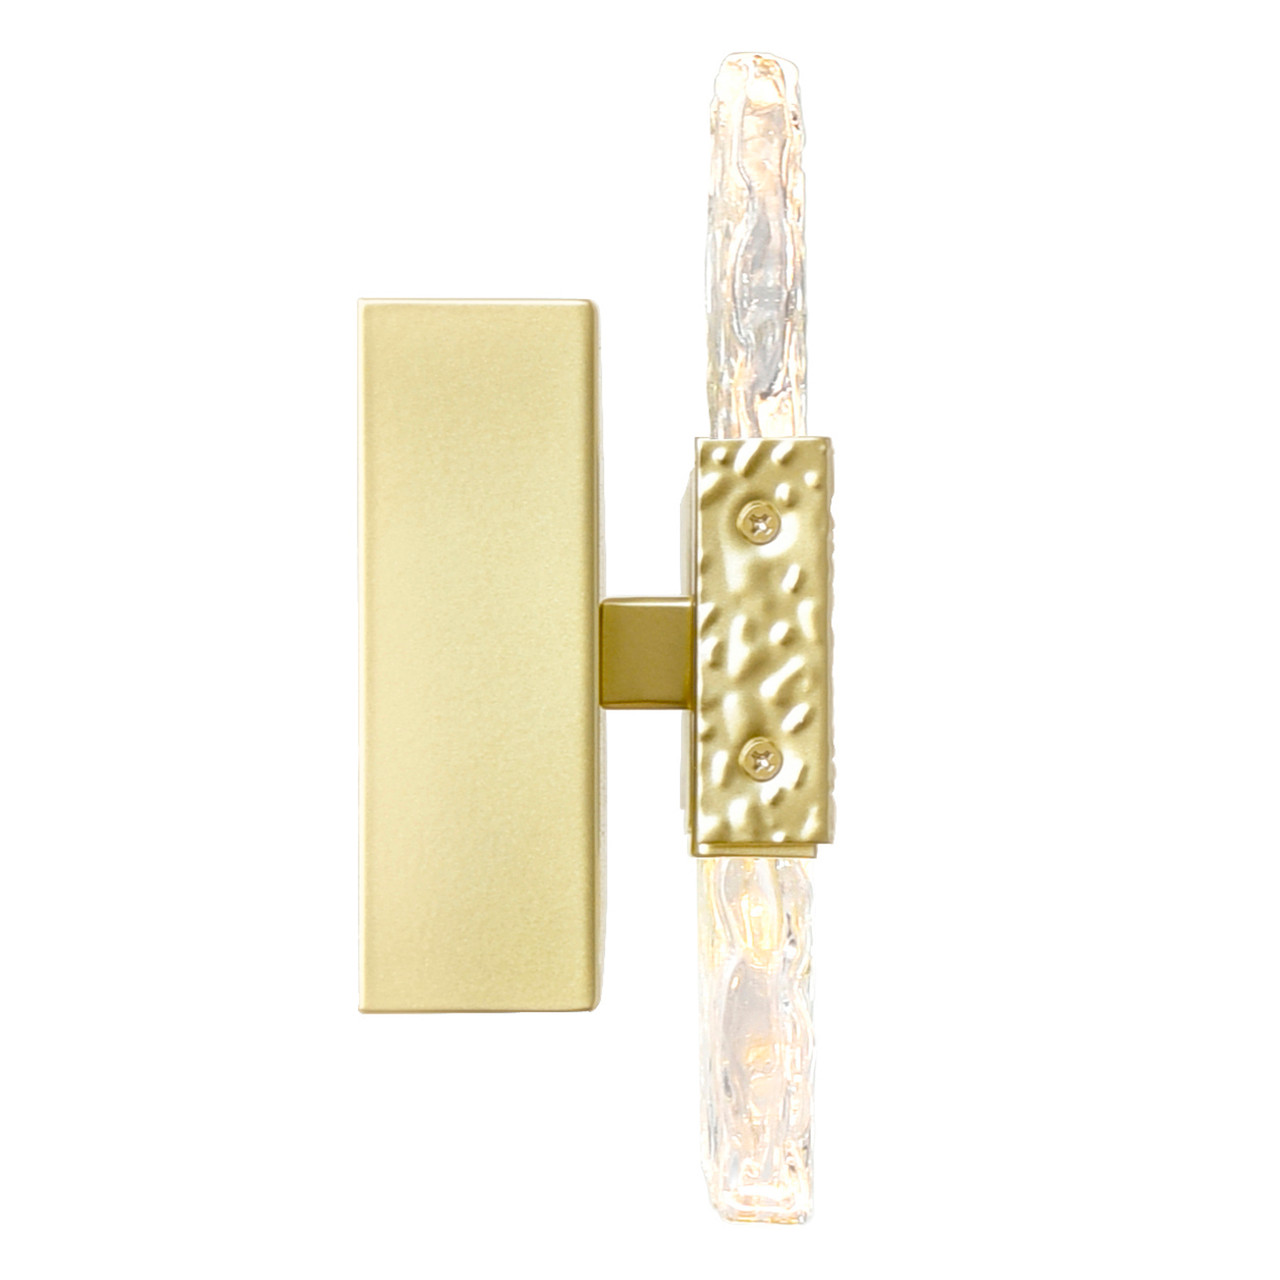 CWI LIGHTING 1090W21-3-620 LED Wall Sconce with Gold Leaf Finish